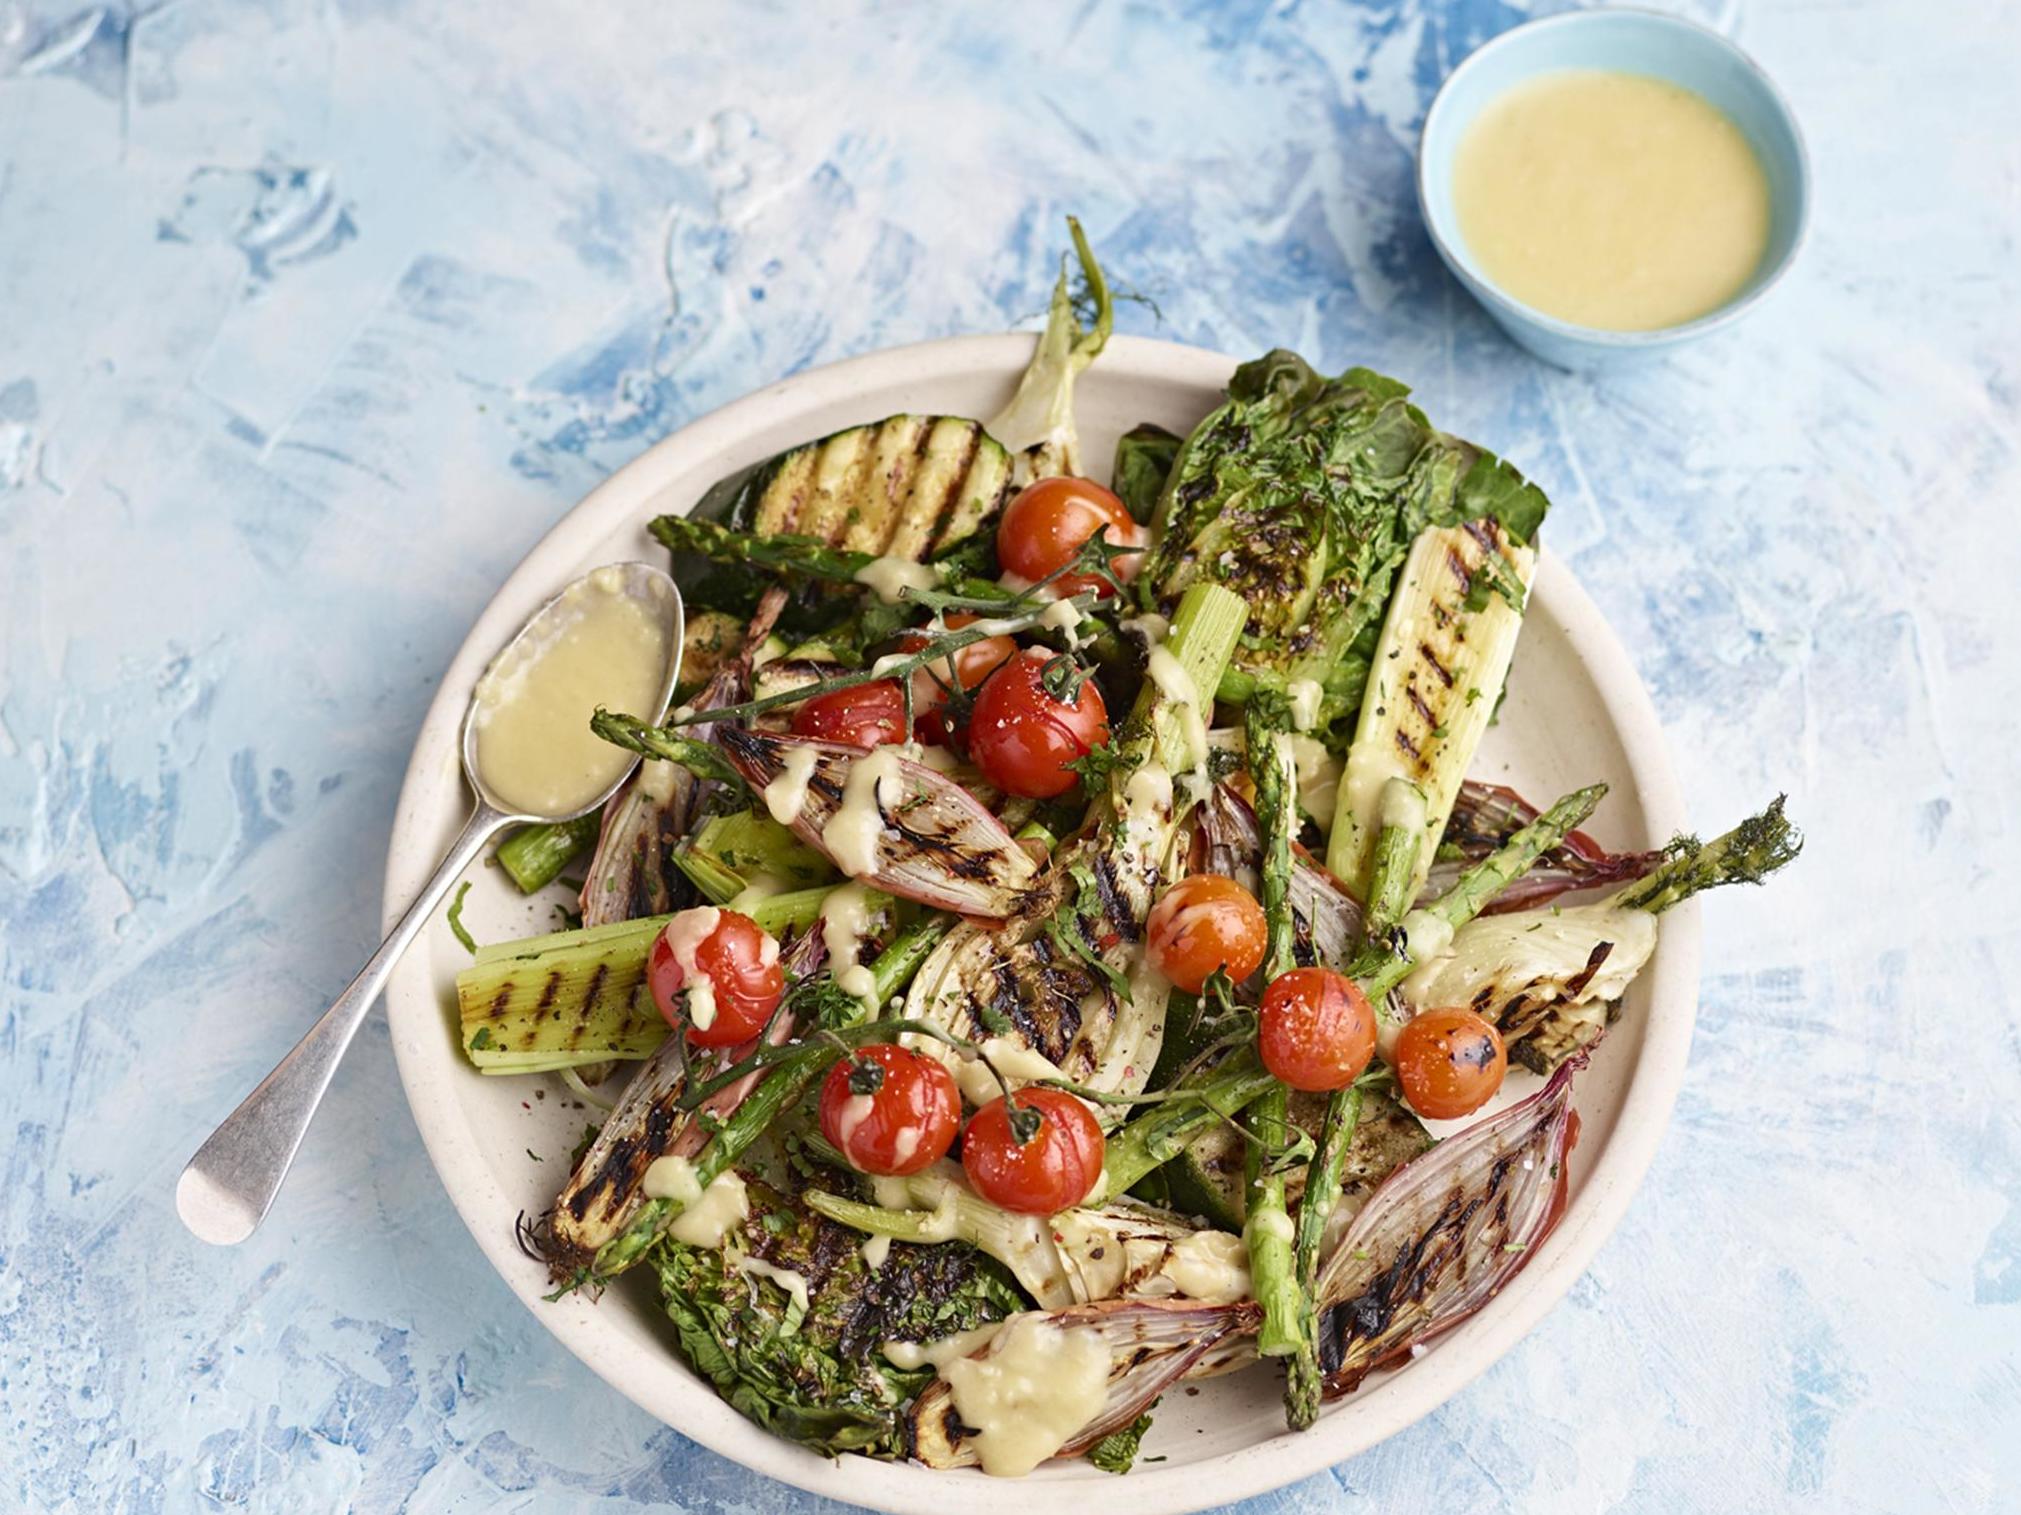 How to make grilled summer vegetables with creamy shallot dressing